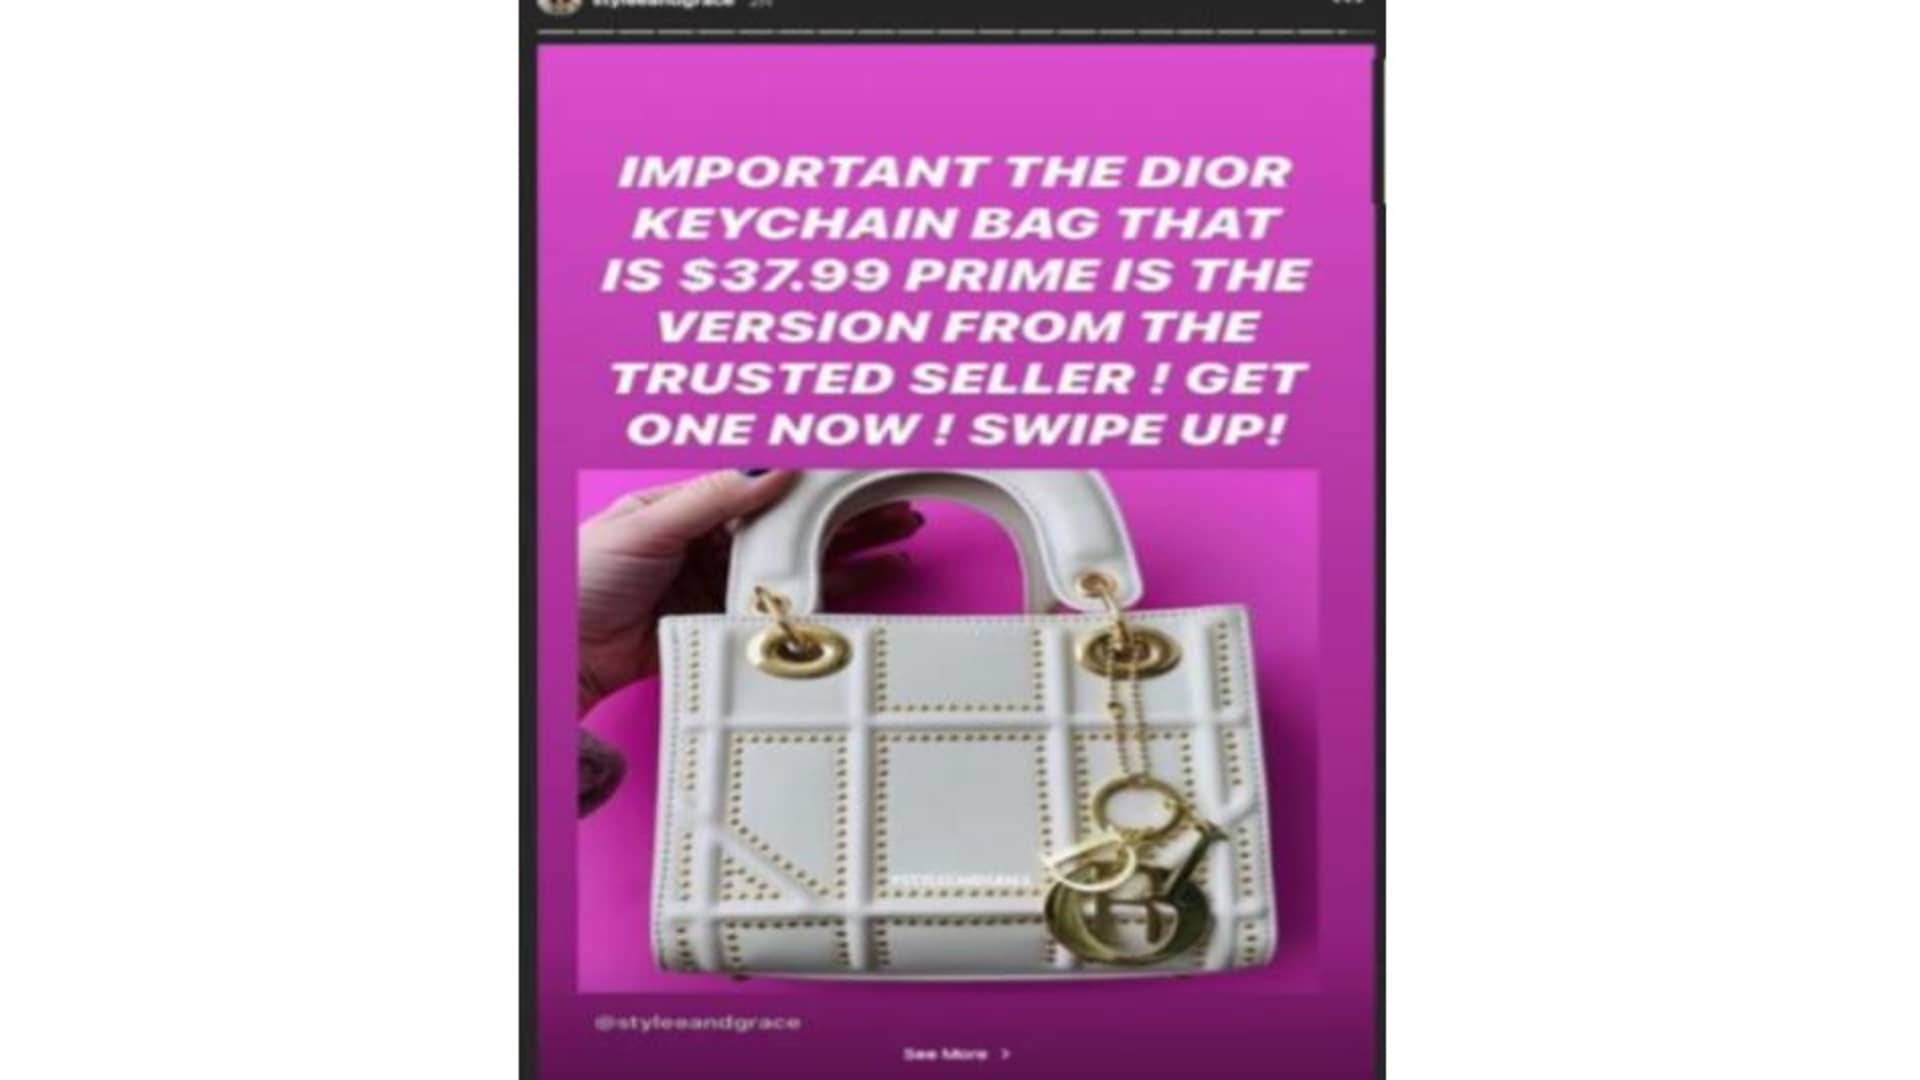 An example of one of Fitzpatrick's Instagram posts allegedly advertising a counterfeit Dior bag.